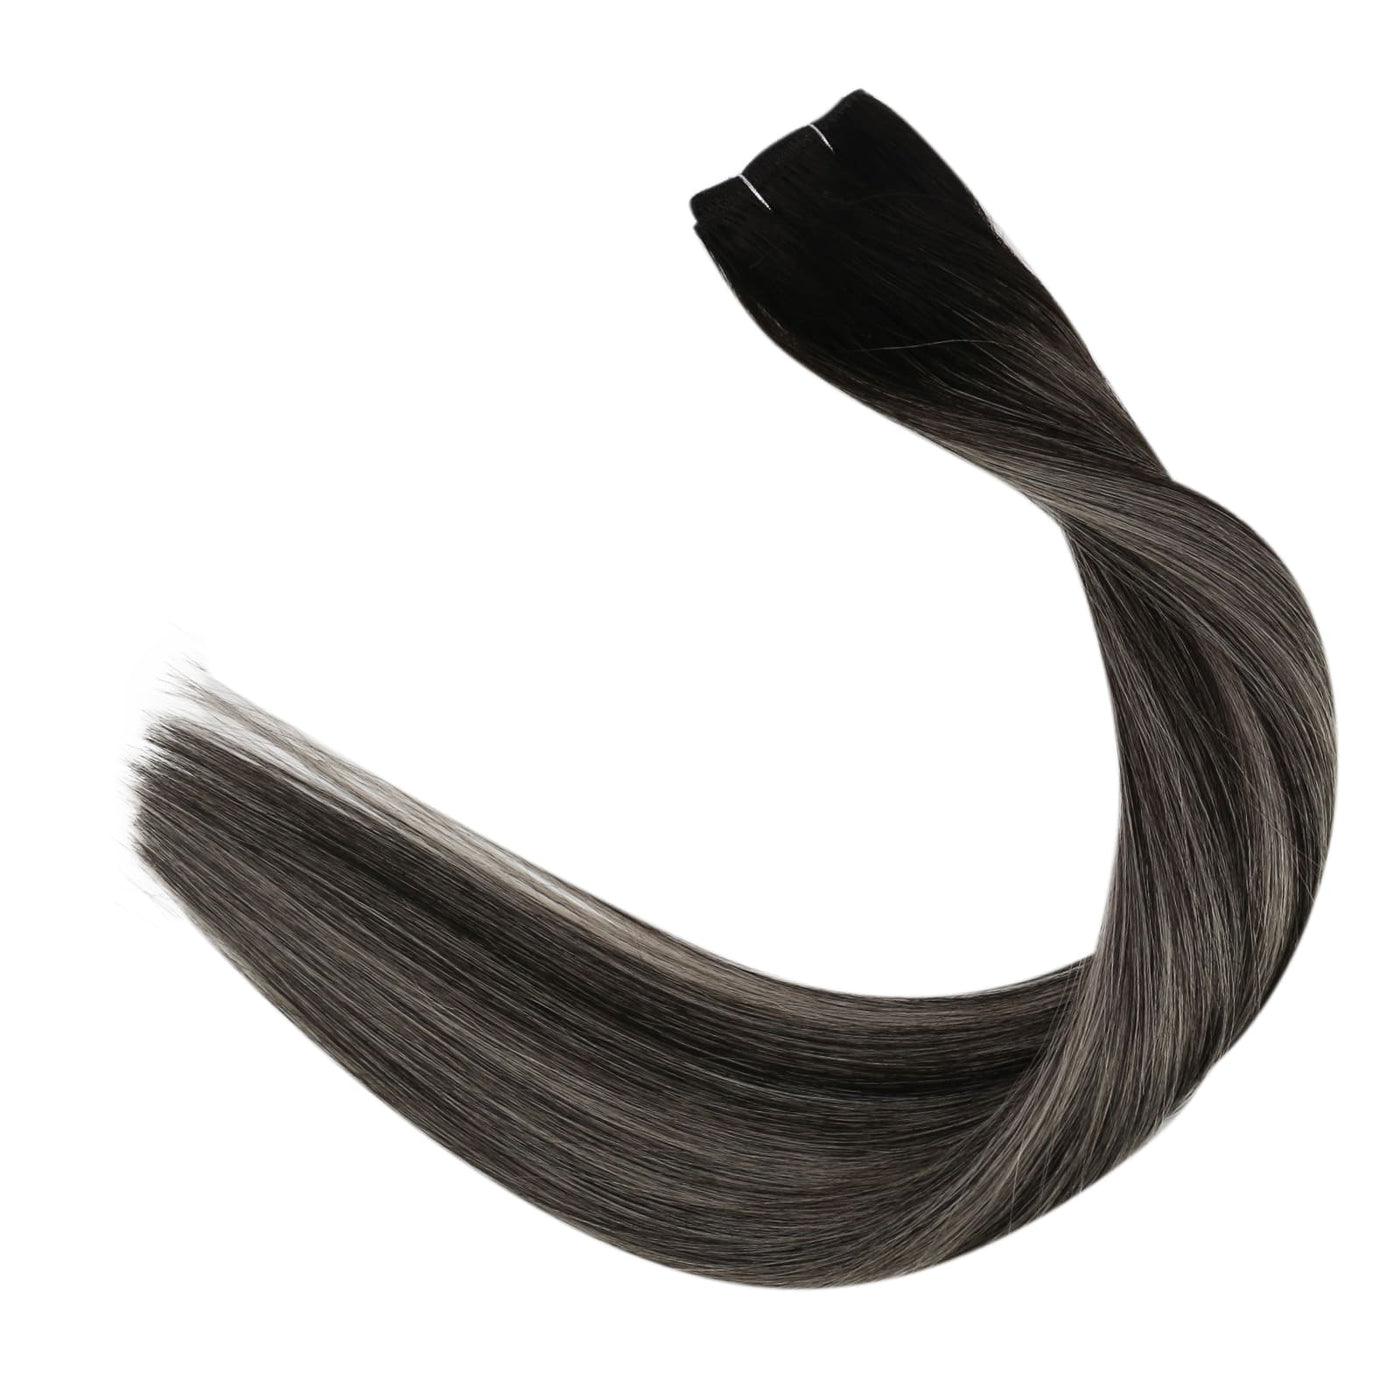 Virgin Hair Weft Sew in Extensions Balayage Black Ombre Silver Real Hair Bundles #1B/Silver/1B